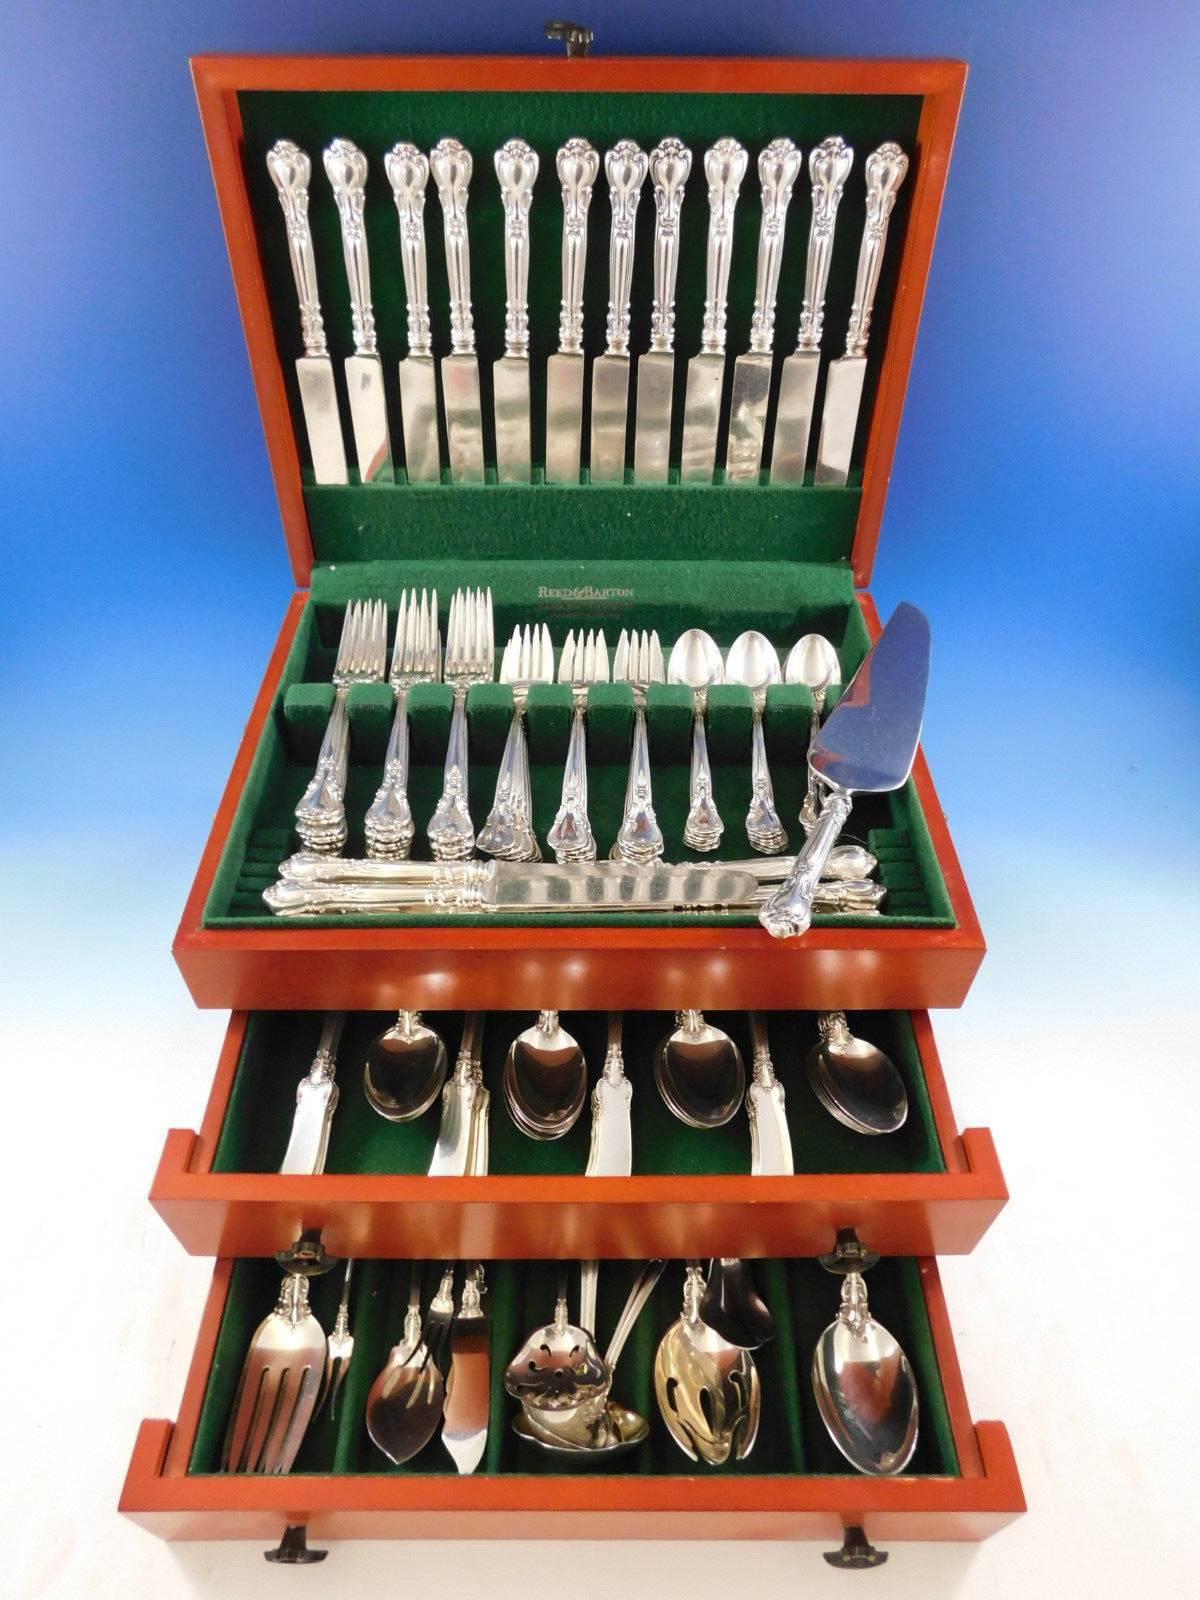 Dinner Size Chantilly by Gorham sterling silver Flatware set, 162 pieces. This set includes:

24 Dinner Size Knives, 9 5/8